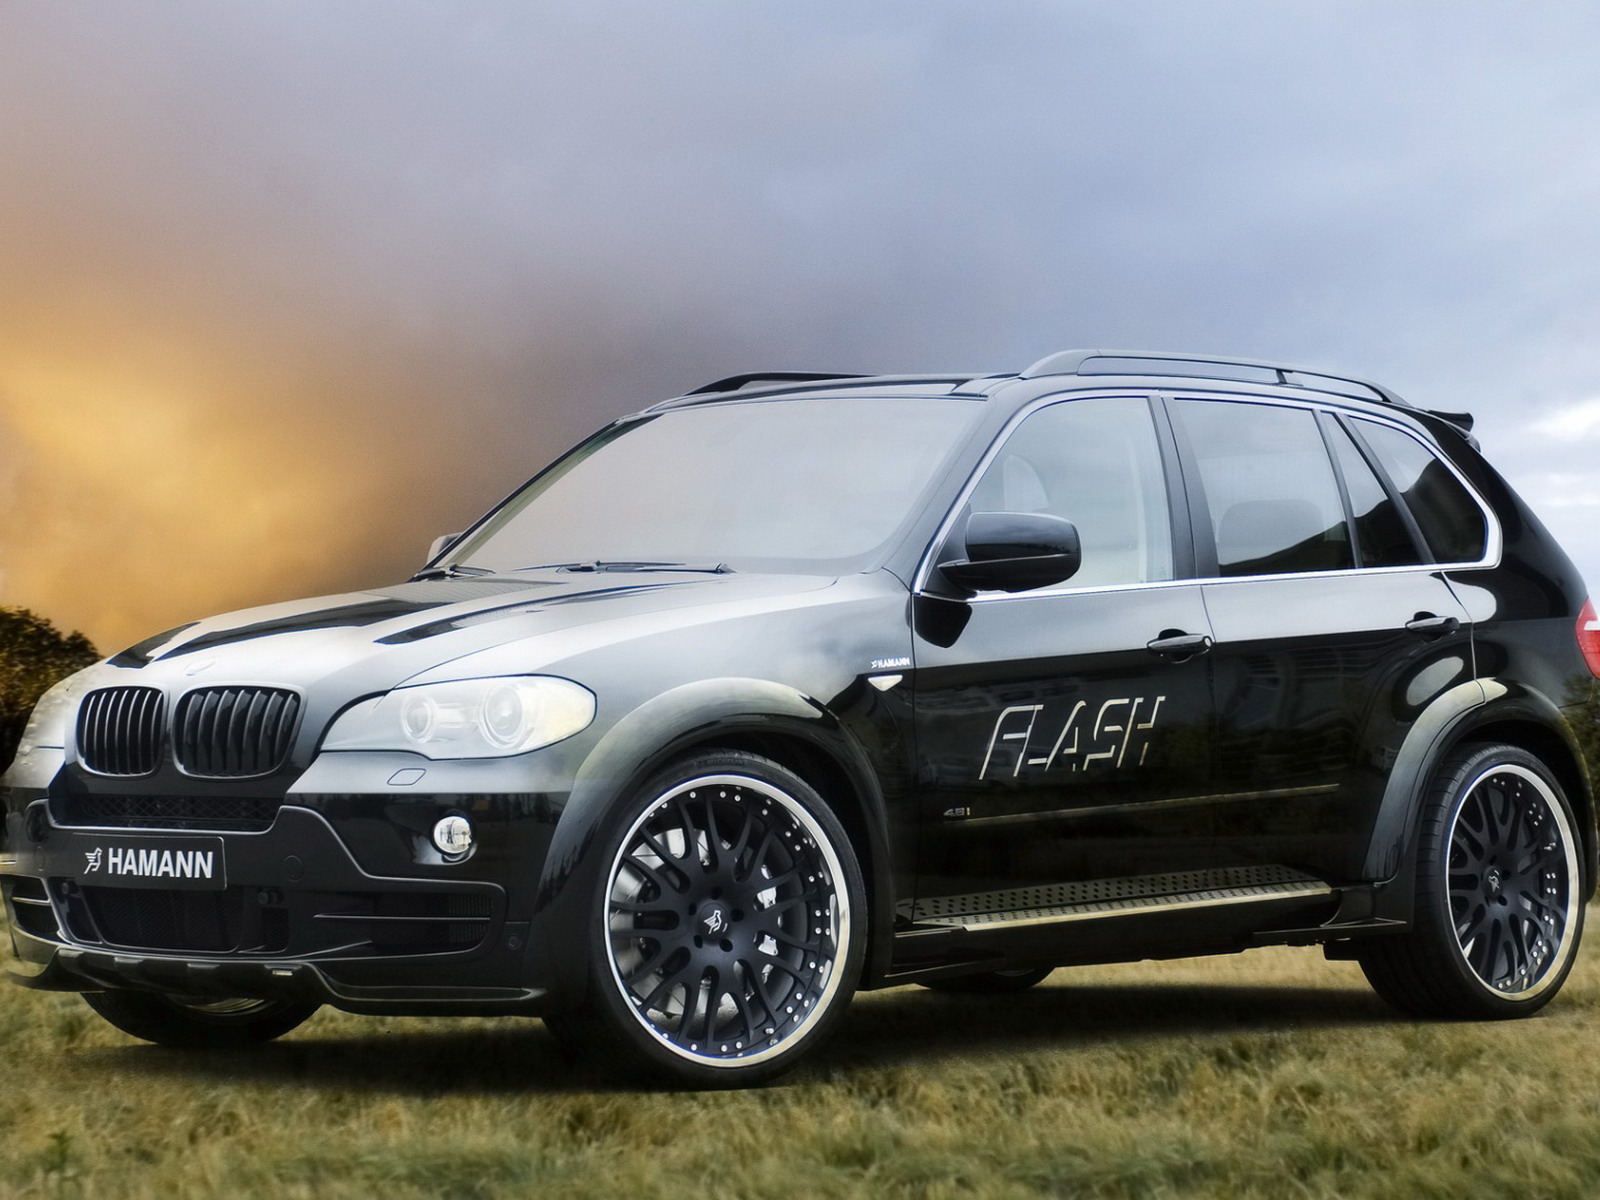 BMW x5 by Hamann tuning wallpaper ~ The Wallpaper Database